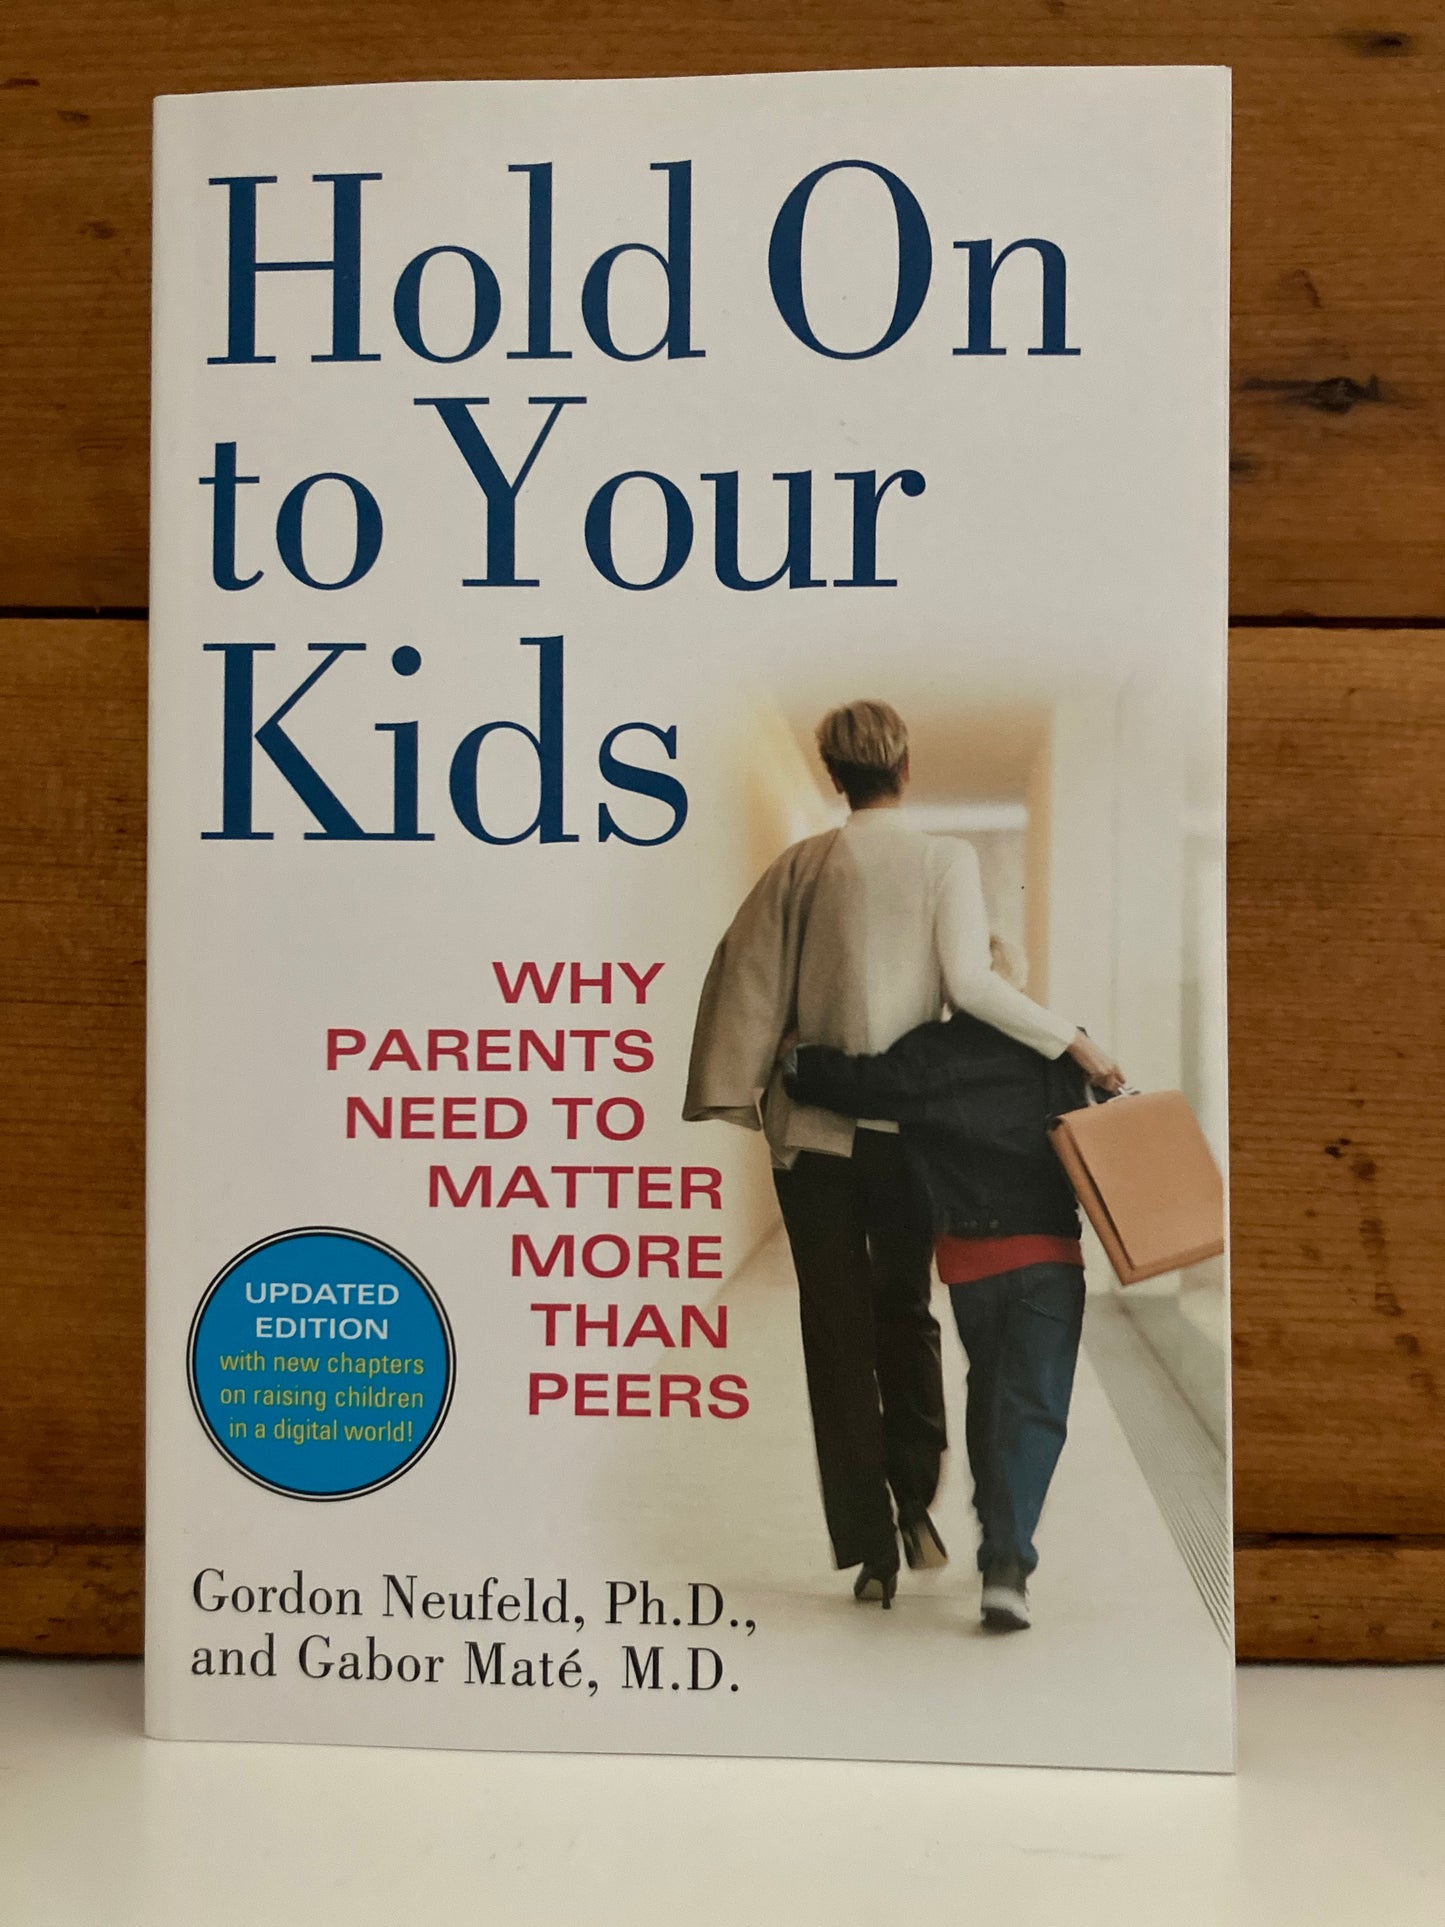 Parenting Resource Book - HOLD ON TO YOUR KIDS